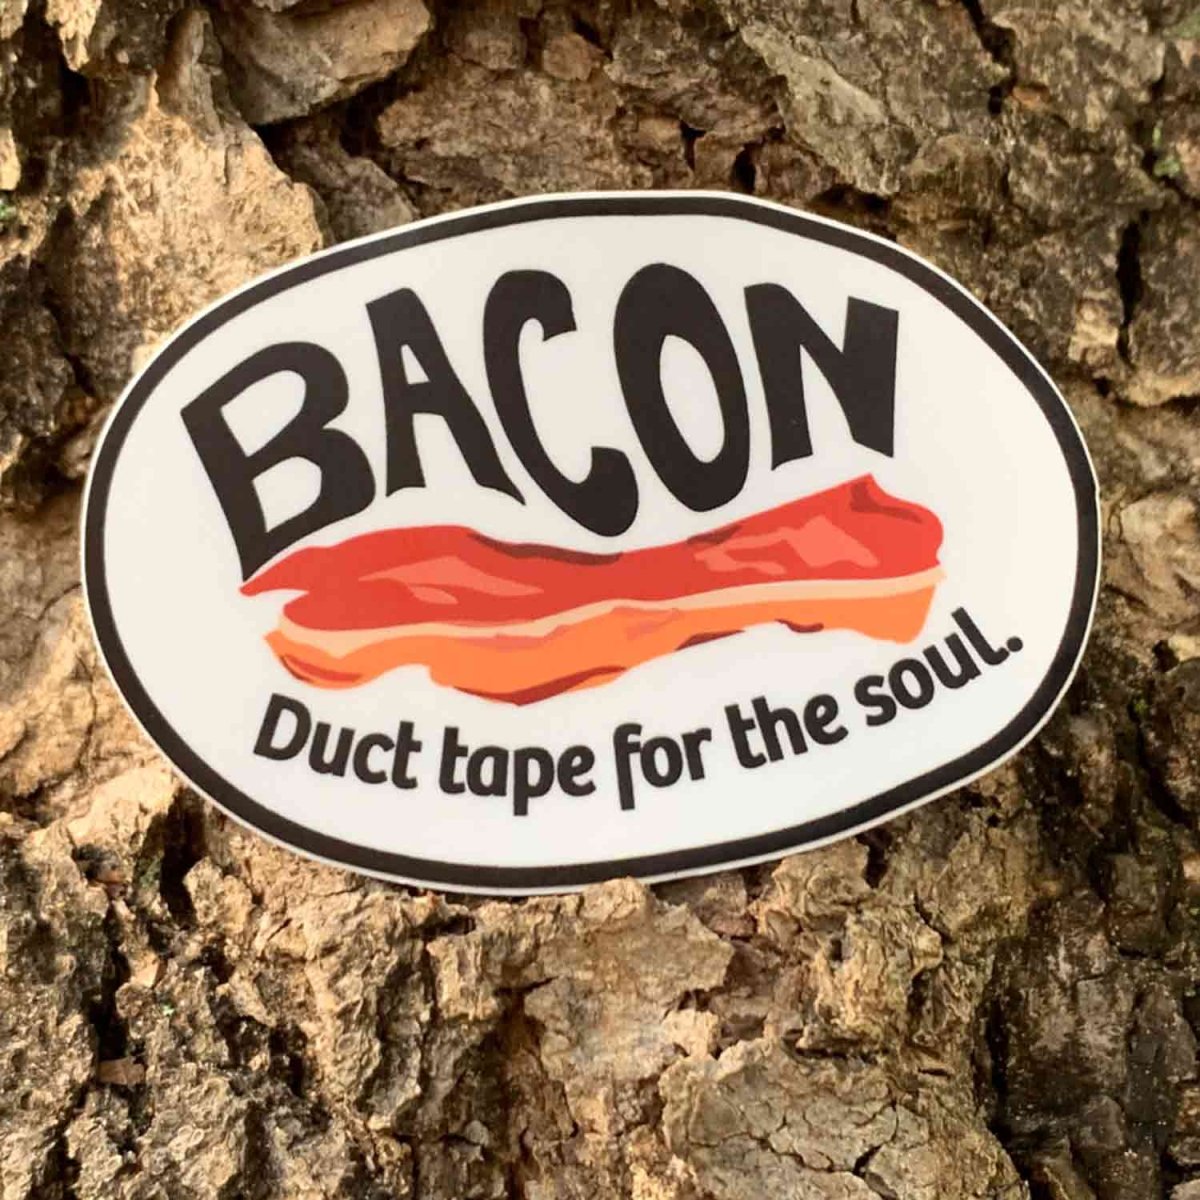 Bacon, Soul Duct Tape Premium Stickers and Refrigerator Magnets, Foodie Gift, Chef, Cook, Kitchen, King of Comfort Food, Funny